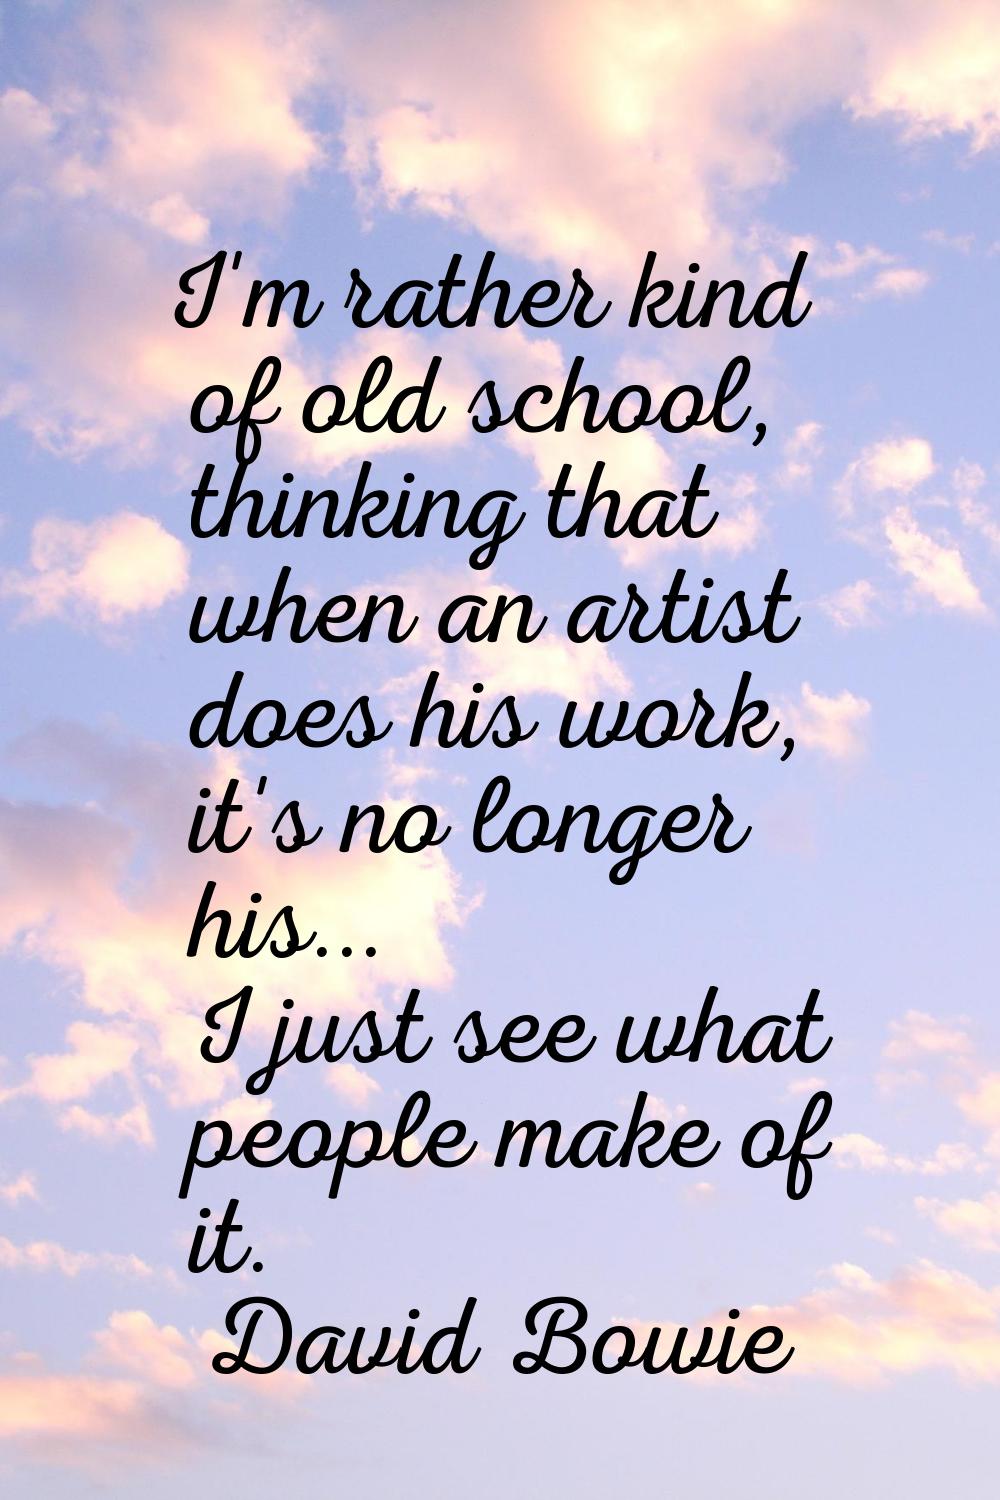 I'm rather kind of old school, thinking that when an artist does his work, it's no longer his... I 